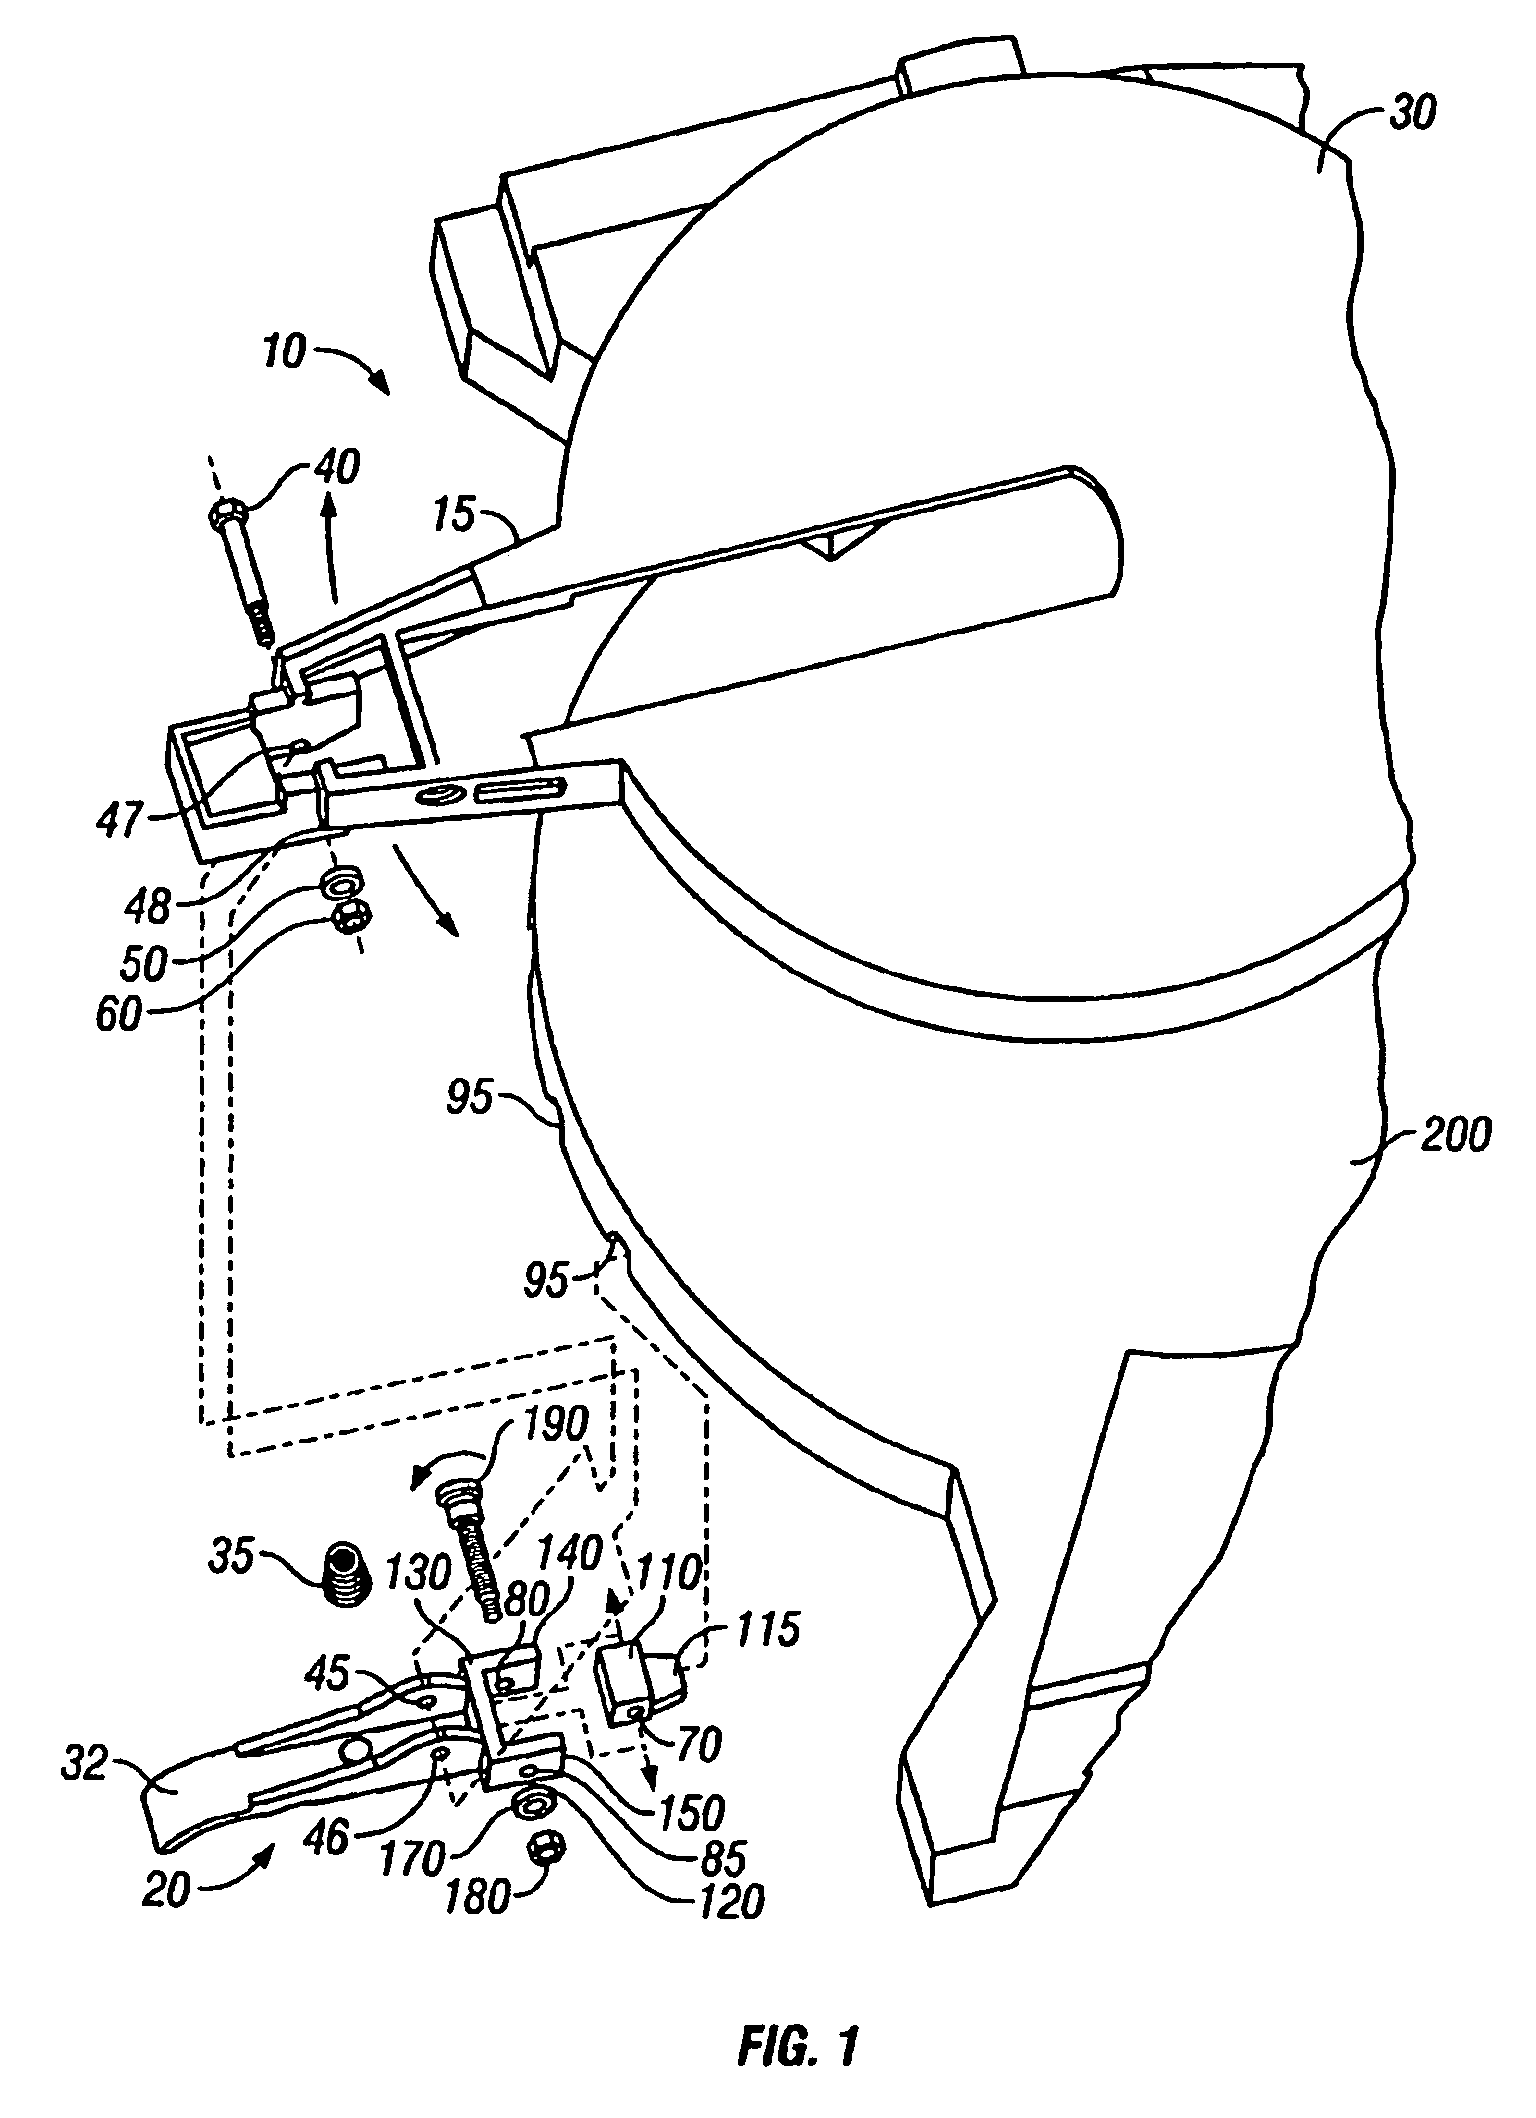 Cutting assembly having multiple turntable locking mechanisms